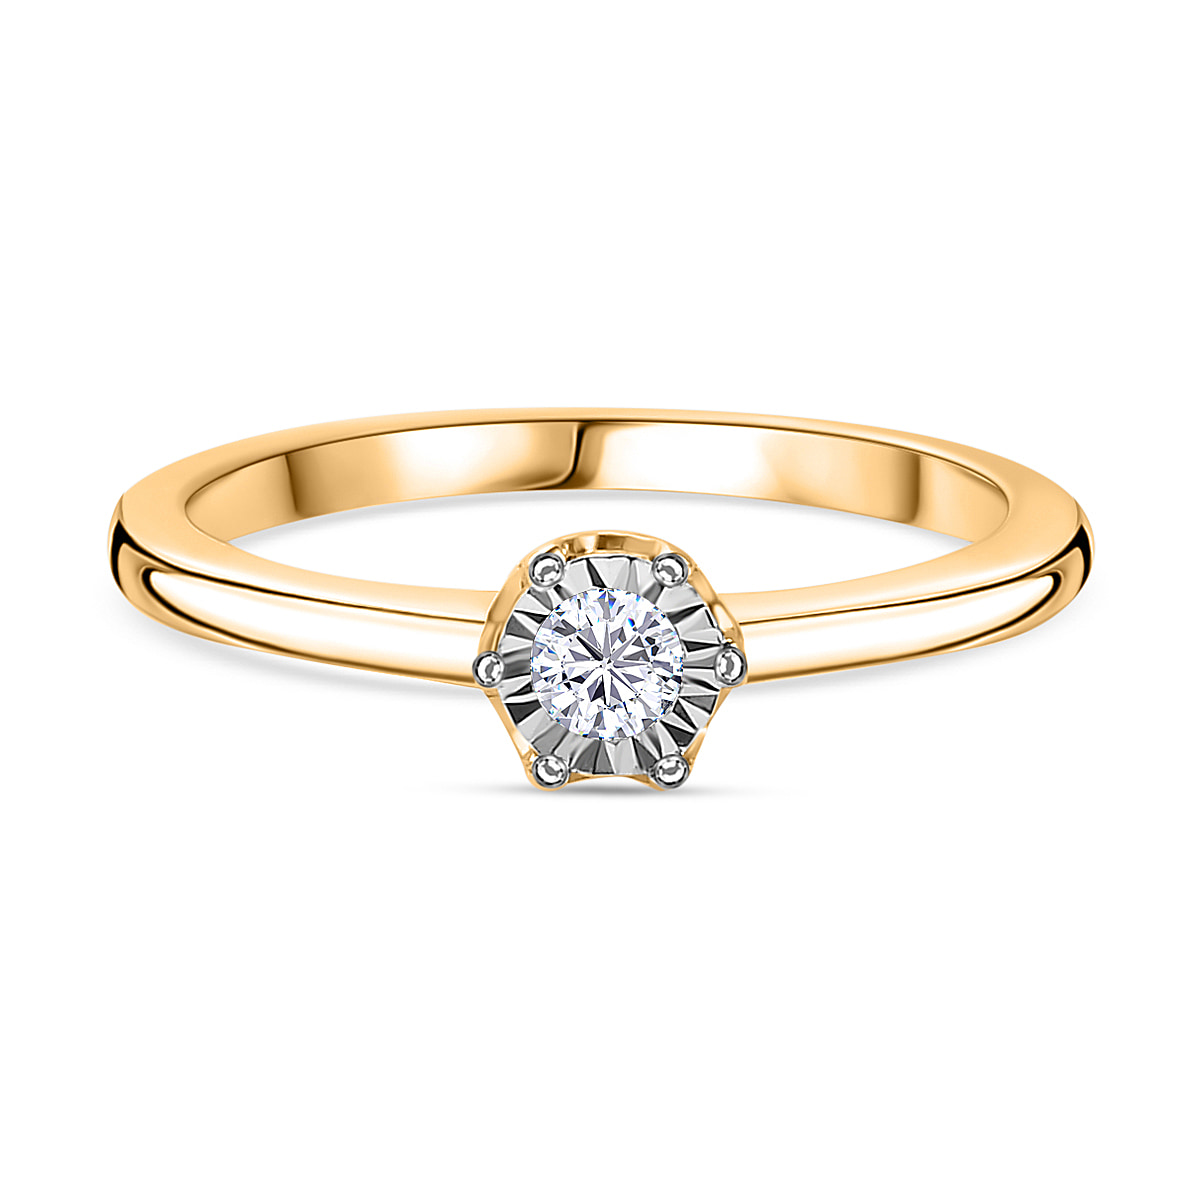 One Time NY Closeout - 14K Yellow Gold Certified SI-G-H Diamond Solitaire Ring